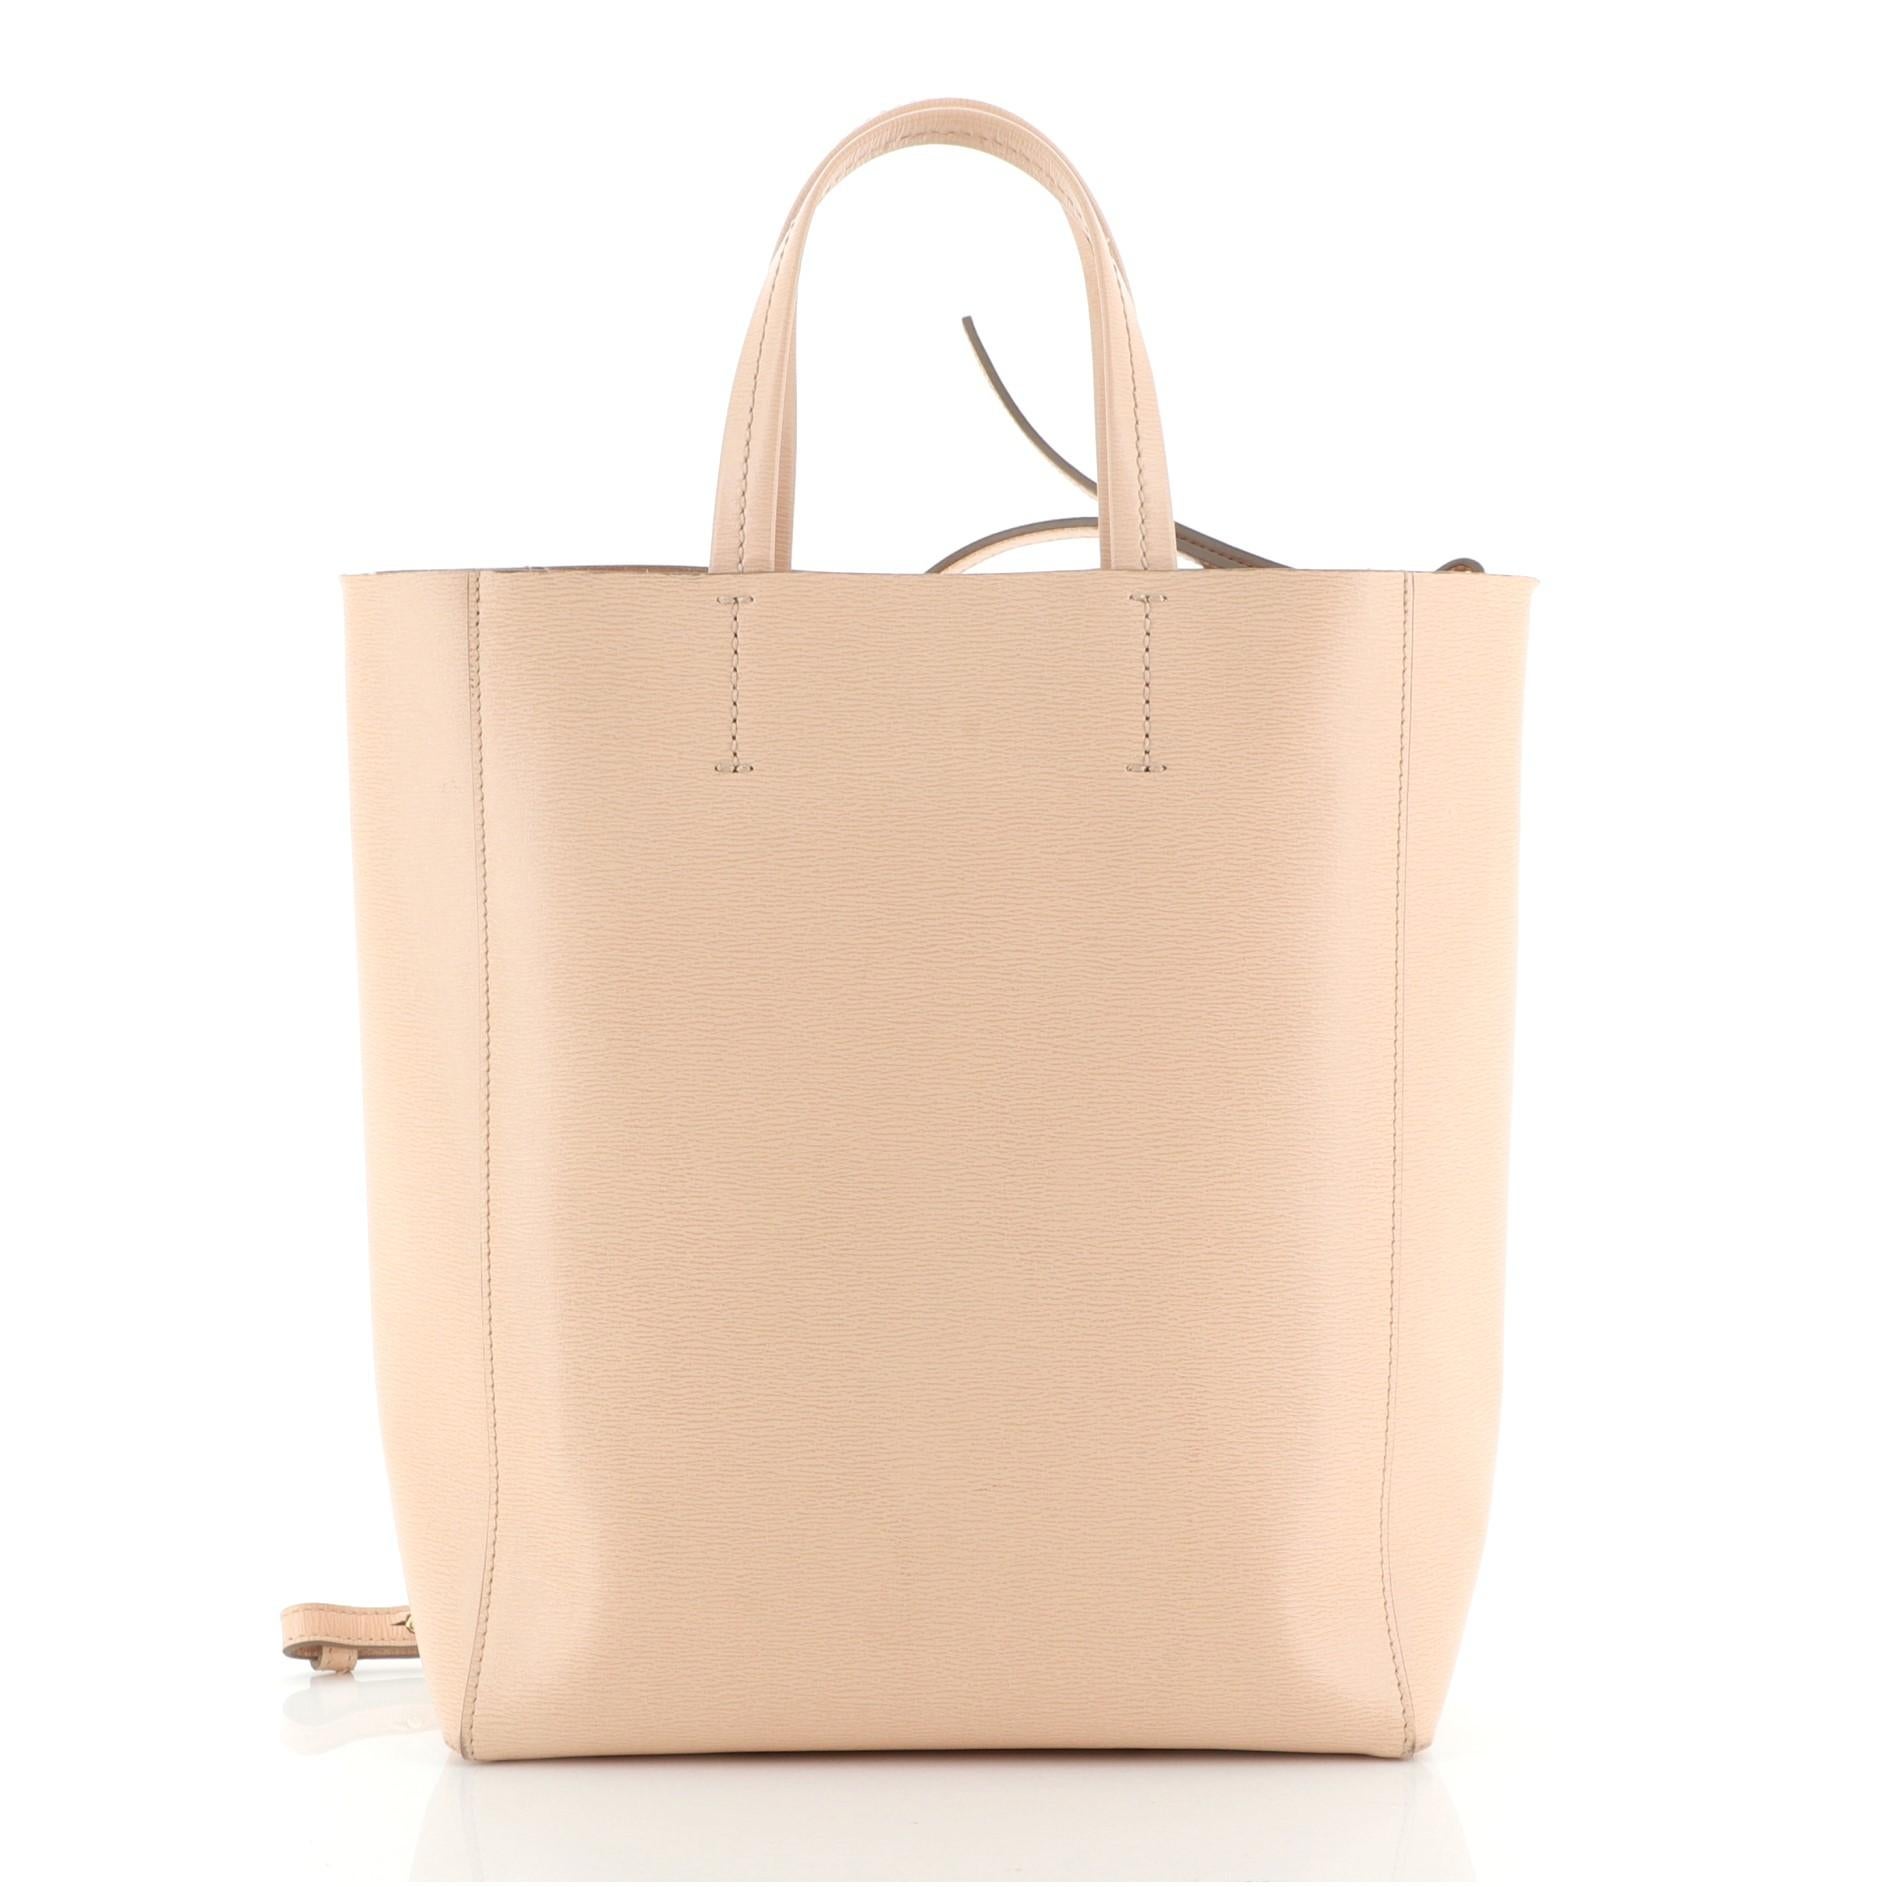 Celine Vertical Cabas Tote Grained Calfskin Small
Pink

Condition Details: Wear and slight darkening on base corners, strap and handles, scuffs in interior, scratches on hardware.

50140MSC

Height 11